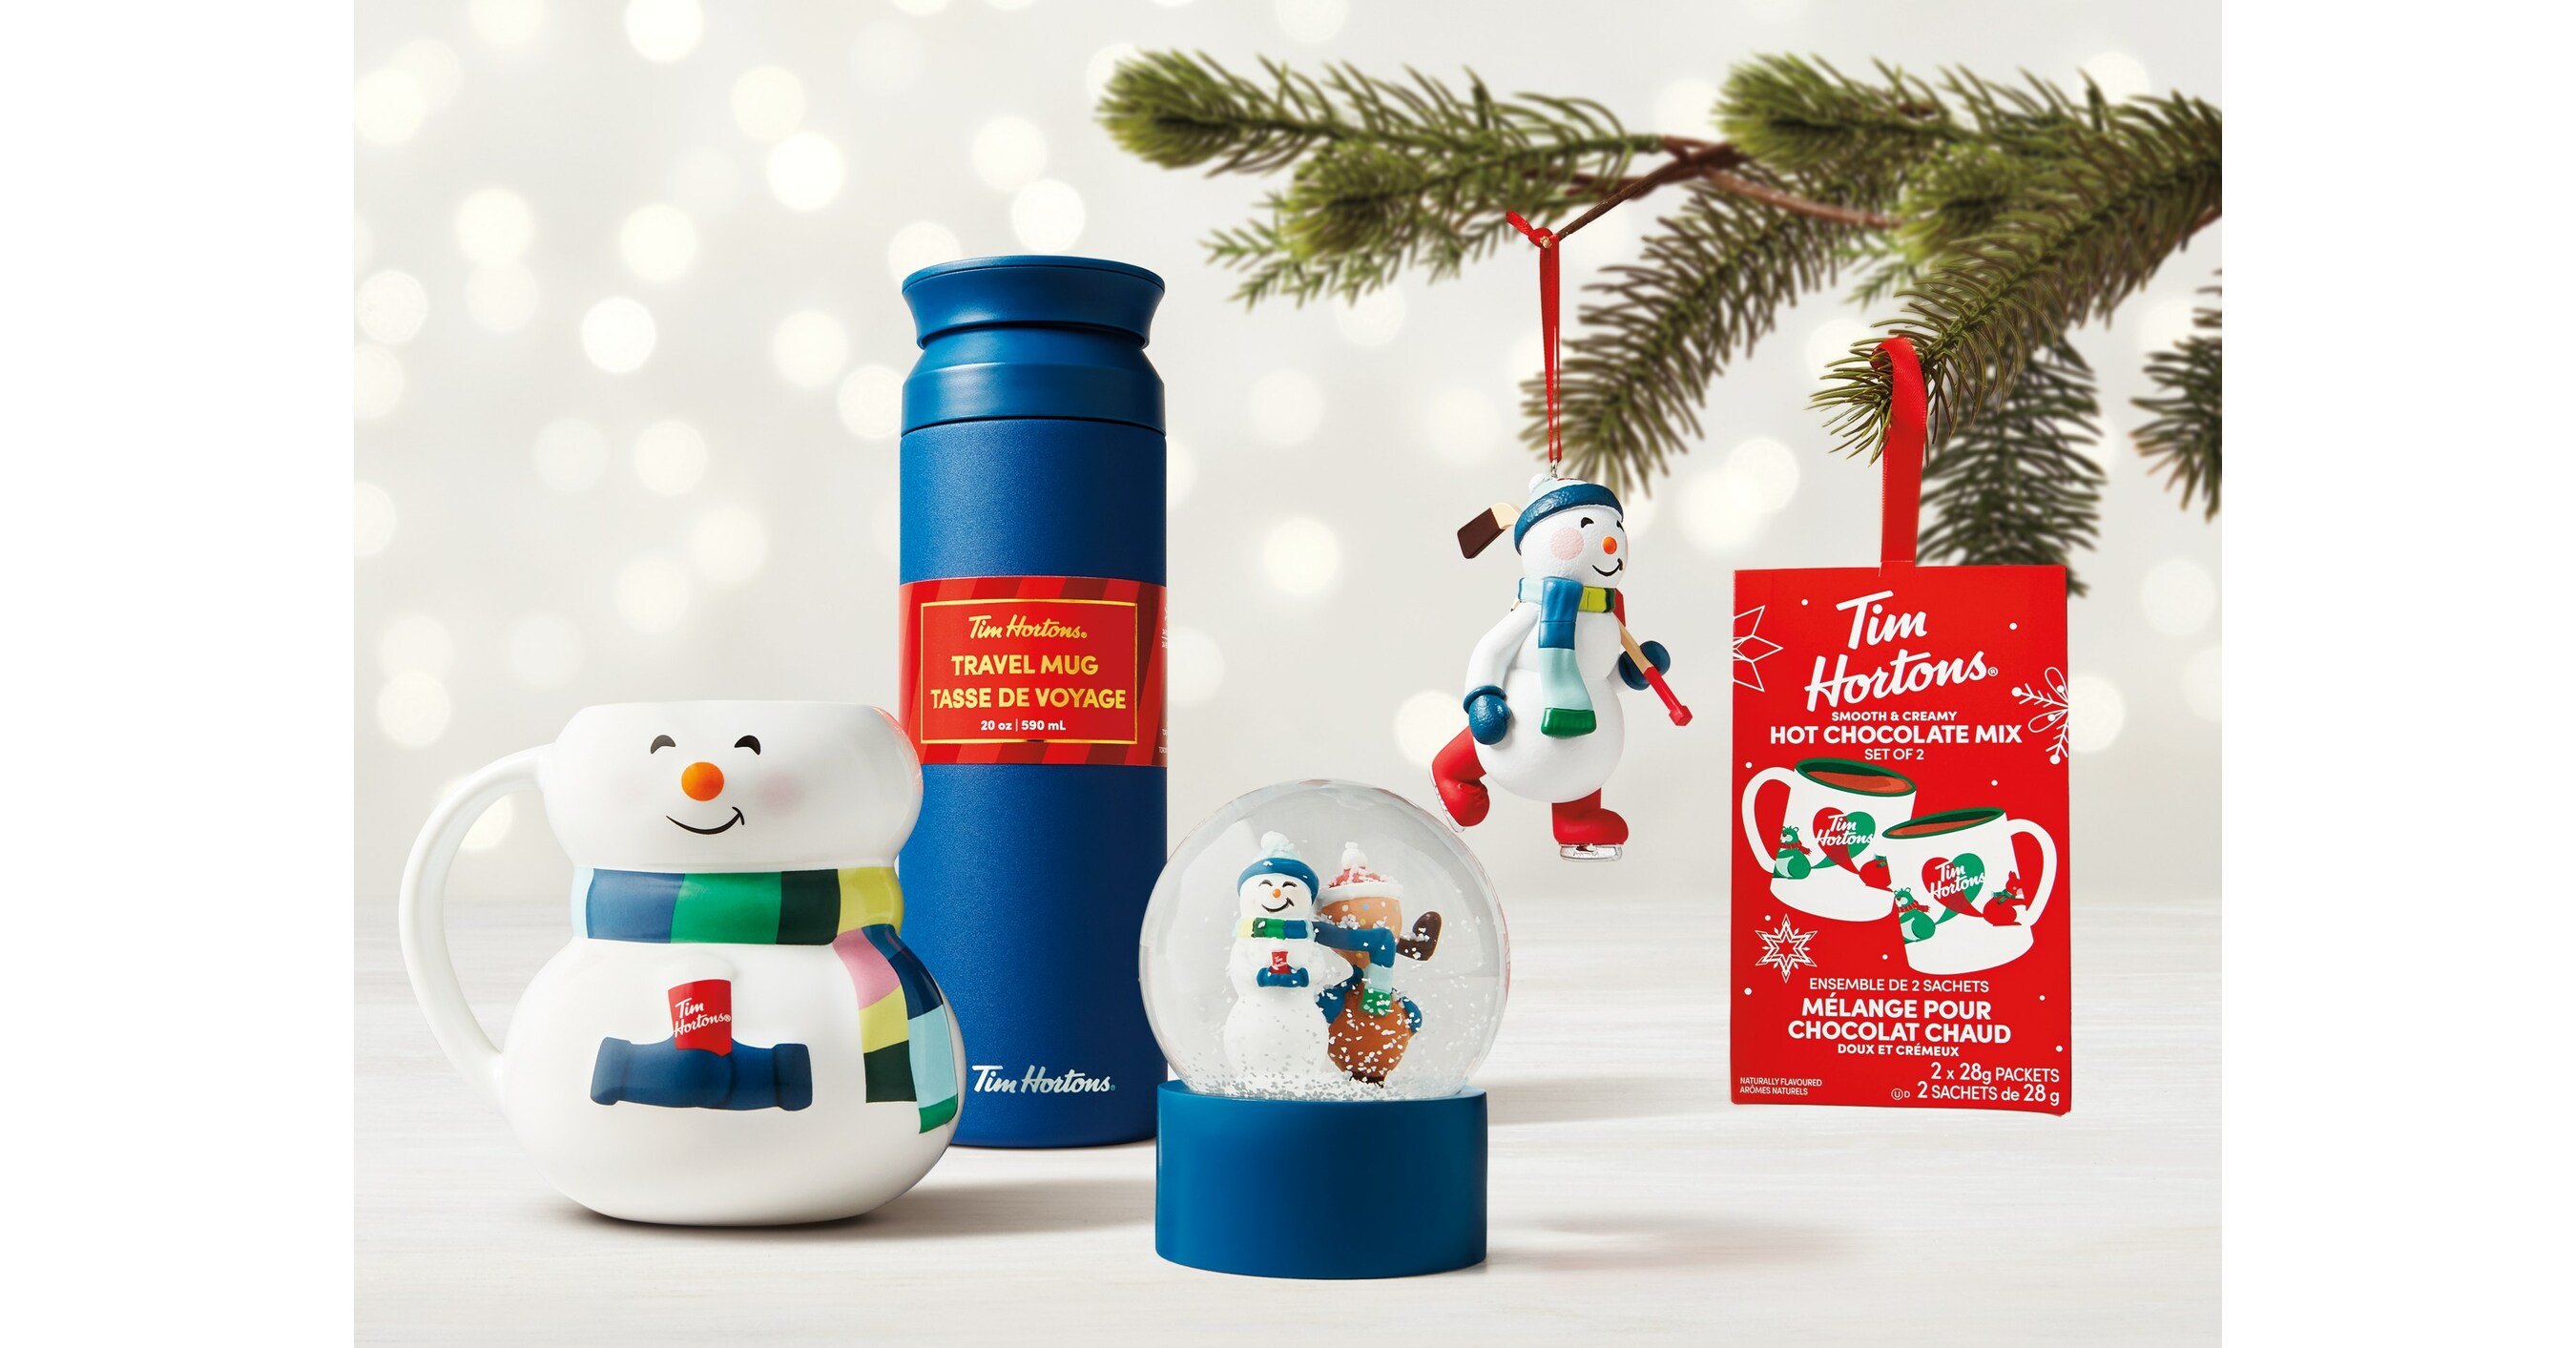 Tim Hortons releases scented candles, apparel and more merch for the  holidays